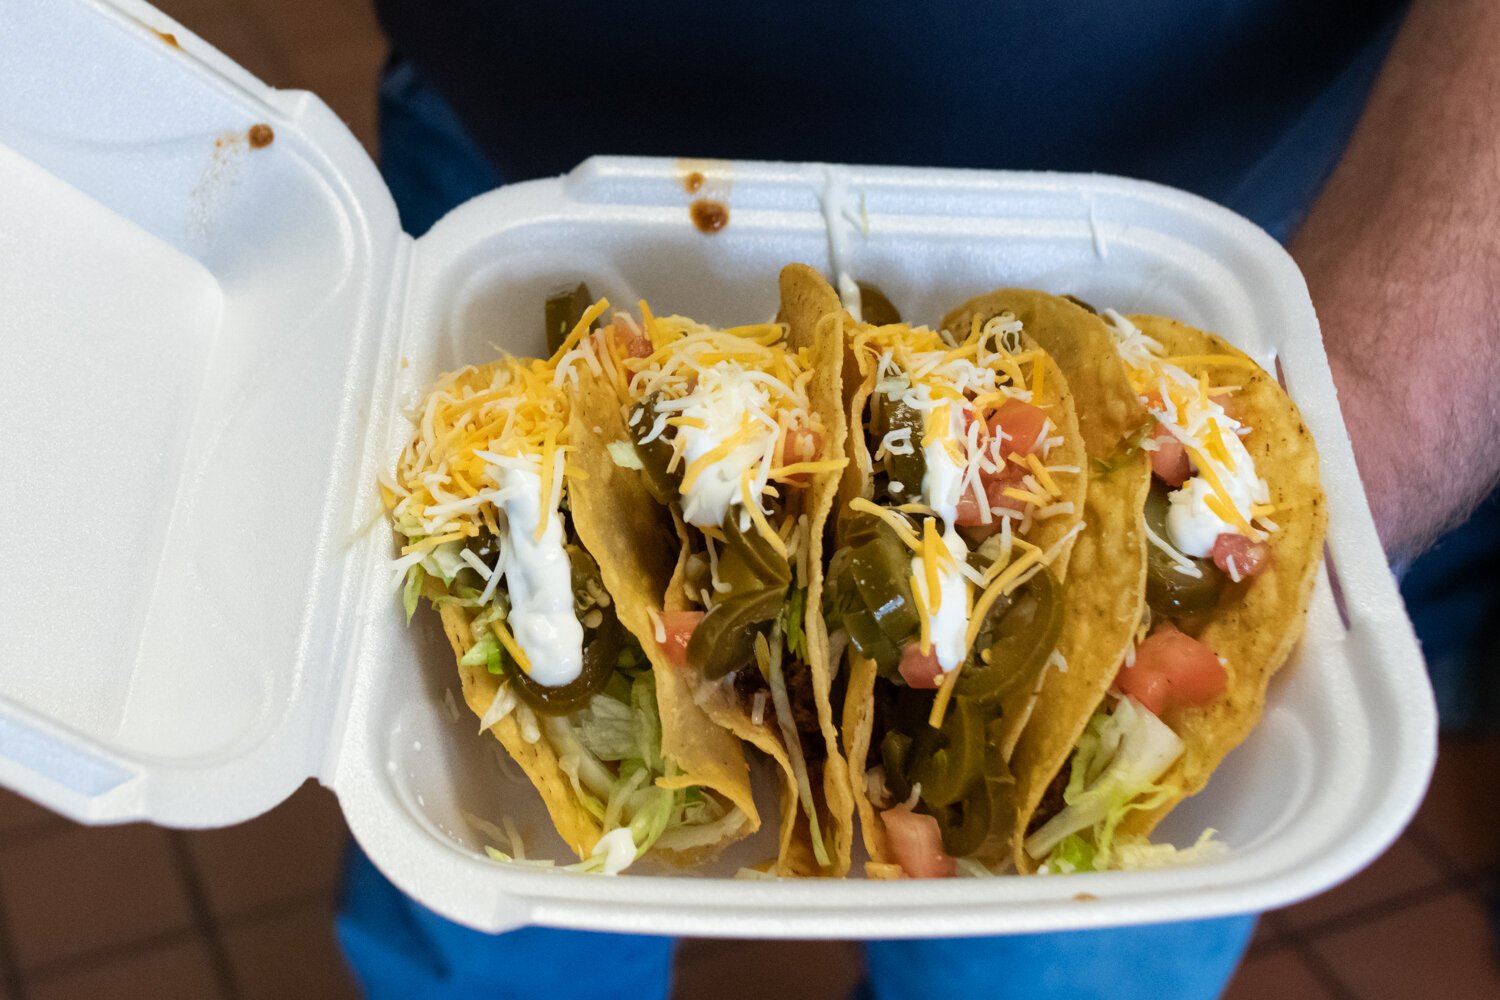 Hard shell beef tacos American style using meat from Wood Farms at Taco Zone, 6433 Bluffton Rd.